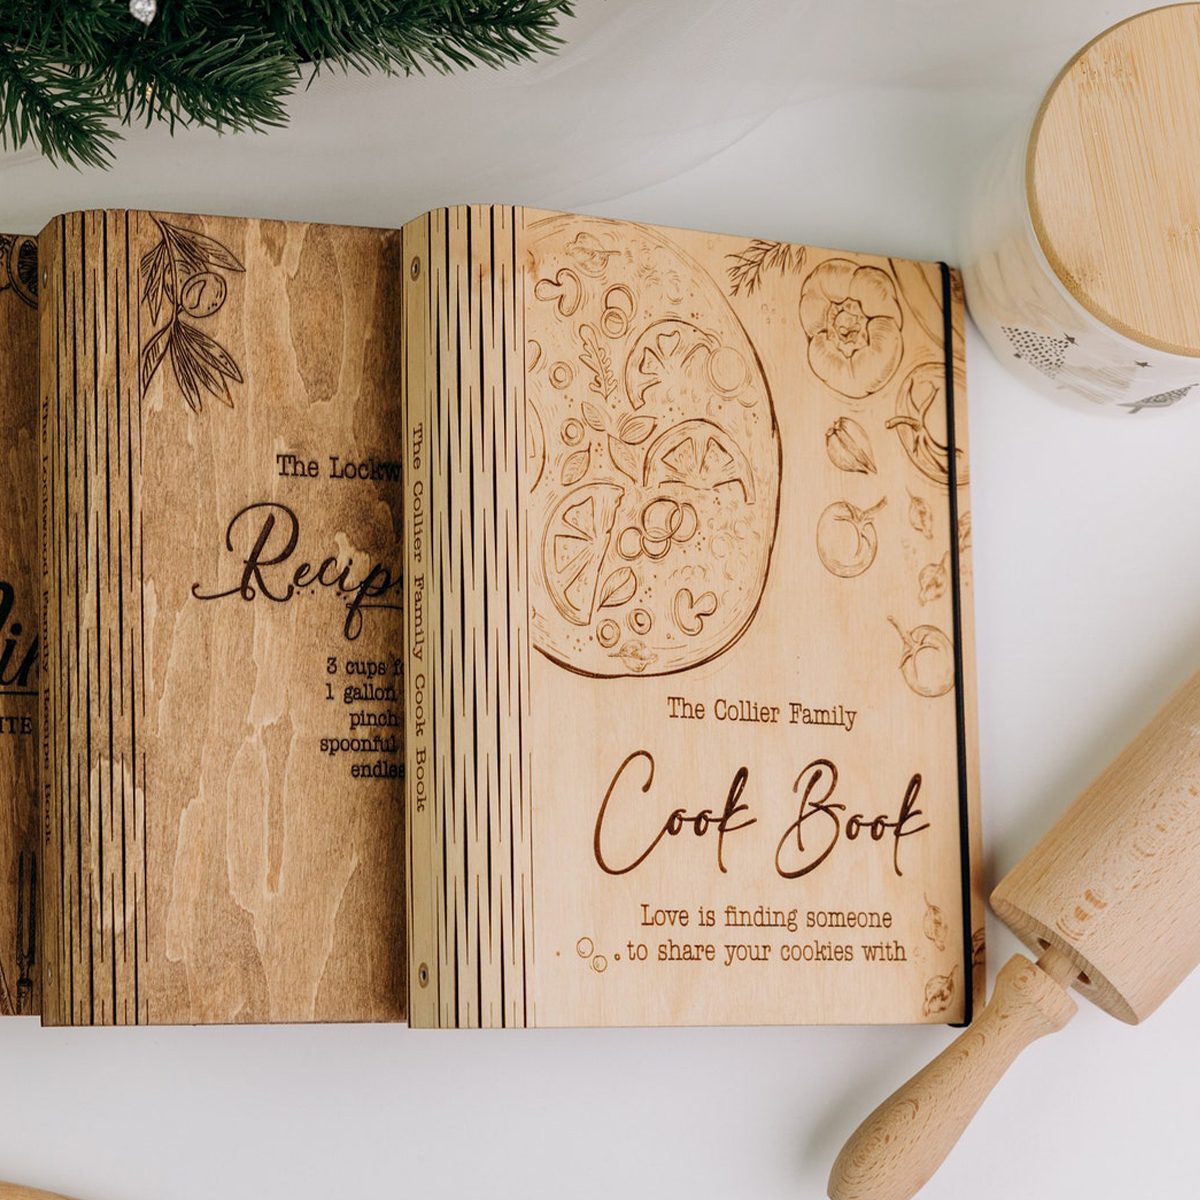 Make your own recipe book for friends and family this holiday season! , gift idea